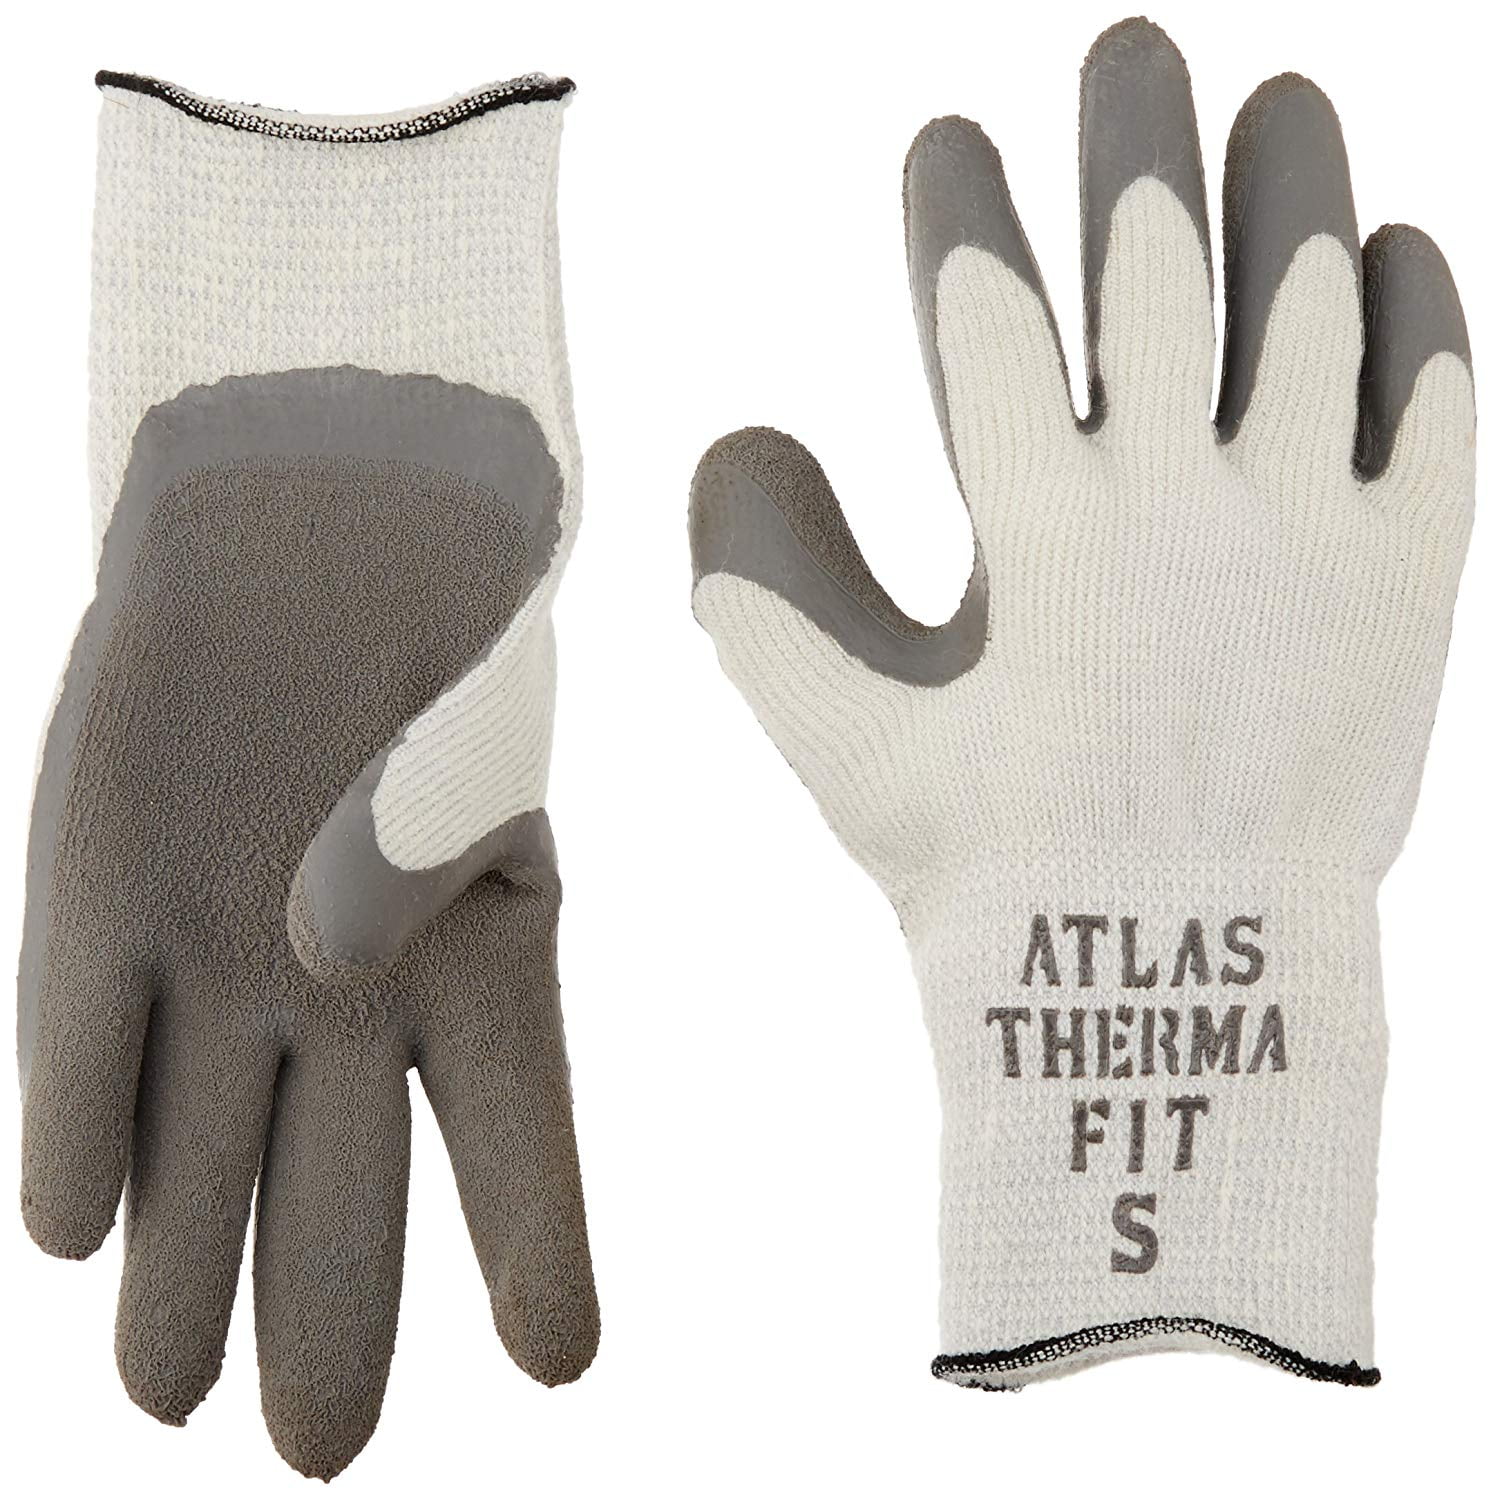 Atlas Glove C300IXL Extra Large Atlas Therma Fit Gloves 